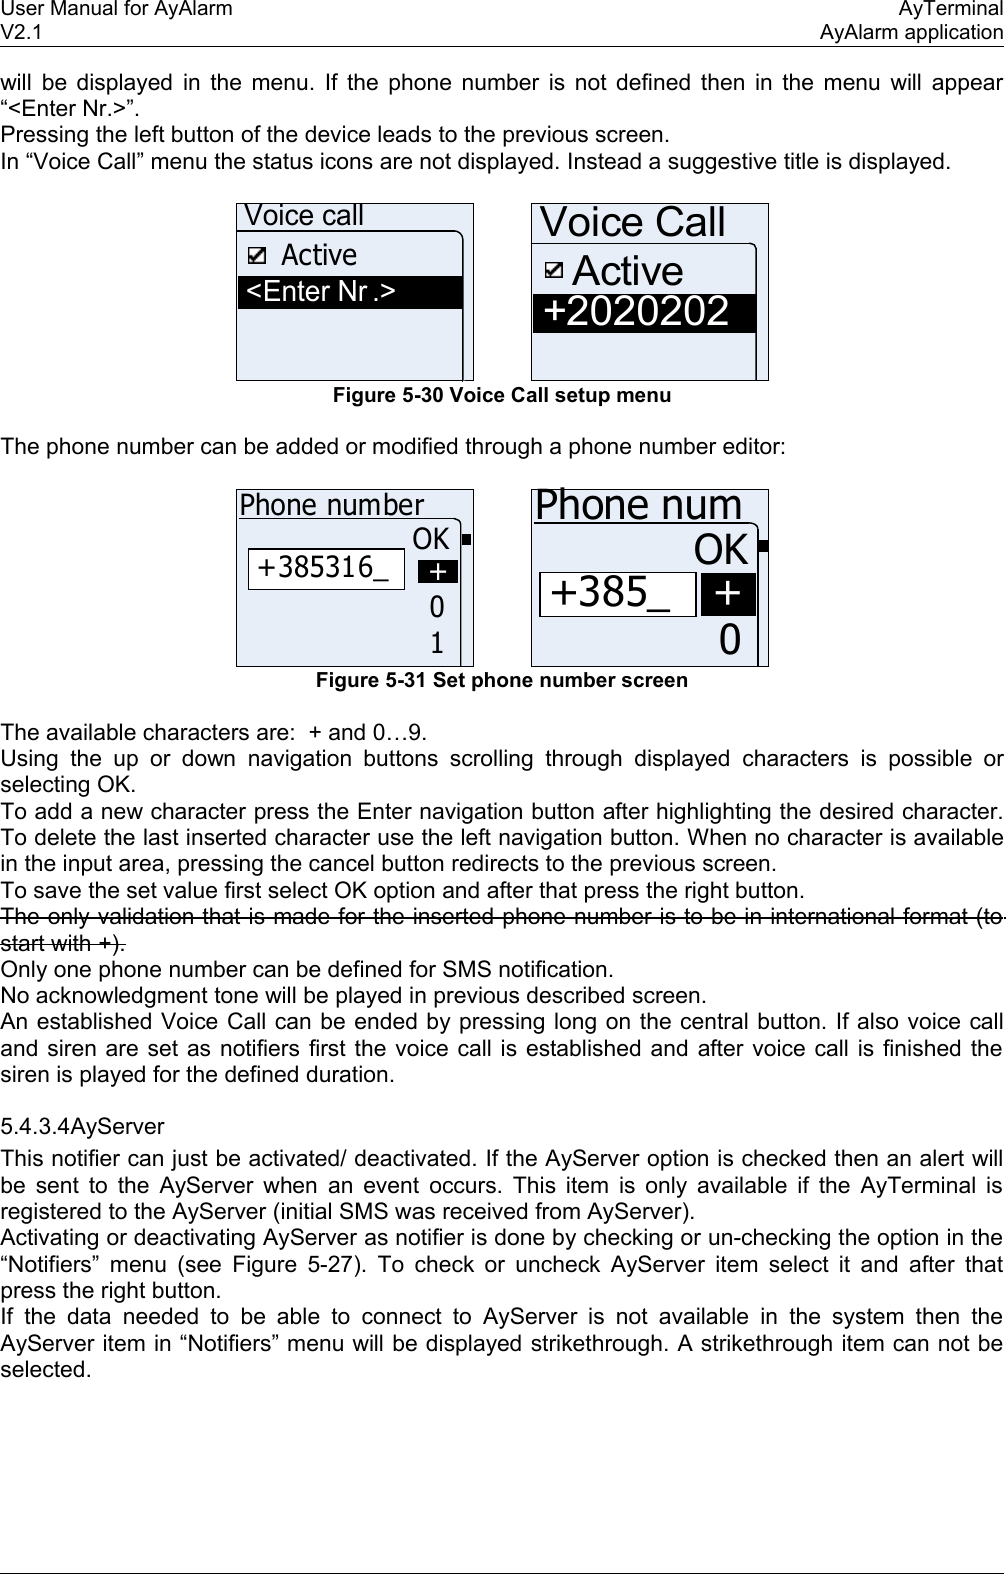 User Manual for AyAlarm AyTerminalV2.1 AyAlarm applicationwill be displayed in the menu. If the phone number is not defined then in the menu will appear “&lt;Enter Nr.&gt;”.Pressing the left button of the device leads to the previous screen.In “Voice Call” menu the status icons are not displayed. Instead a suggestive title is displayed.&lt;Enter Nr .&gt;ActiveVoice call+2020202Voice CallActiveFigure 5-30 Voice Call setup menuThe phone number can be added or modified through a phone number editor:+385316_Phone numberOK10++385_Phone numOK0+Figure 5-31 Set phone number screenThe available characters are:  + and 0…9.Using the up or down navigation buttons scrolling  through displayed characters is possible or selecting OK. To add a new character press the Enter navigation button after highlighting the desired character. To delete the last inserted character use the left navigation button. When no character is available in the input area, pressing the cancel button redirects to the previous screen.To save the set value first select OK option and after that press the right button.The only validation that is made for the inserted phone number is to be in international format (to start with +).Only one phone number can be defined for SMS notification.No acknowledgment tone will be played in previous described screen.An established Voice Call can be ended by pressing long on the central button. If also voice call and siren are set as notifiers first the voice call is established and after voice call is finished the siren is played for the defined duration.5.4.3.4AyServerThis notifier can just be activated/ deactivated. If the AyServer option is checked then an alert will be sent to the AyServer when an event occurs. This item is only available if the AyTerminal is registered to the AyServer (initial SMS was received from AyServer).Activating or deactivating AyServer as notifier is done by checking or un-checking the option in the “Notifiers” menu (see  Figure 5-27). To check or uncheck AyServer item select it and after that press the right button.If the data  needed to be able to connect to AyServer is not available in the system then the AyServer item in “Notifiers” menu will be displayed strikethrough. A strikethrough item can not be selected.